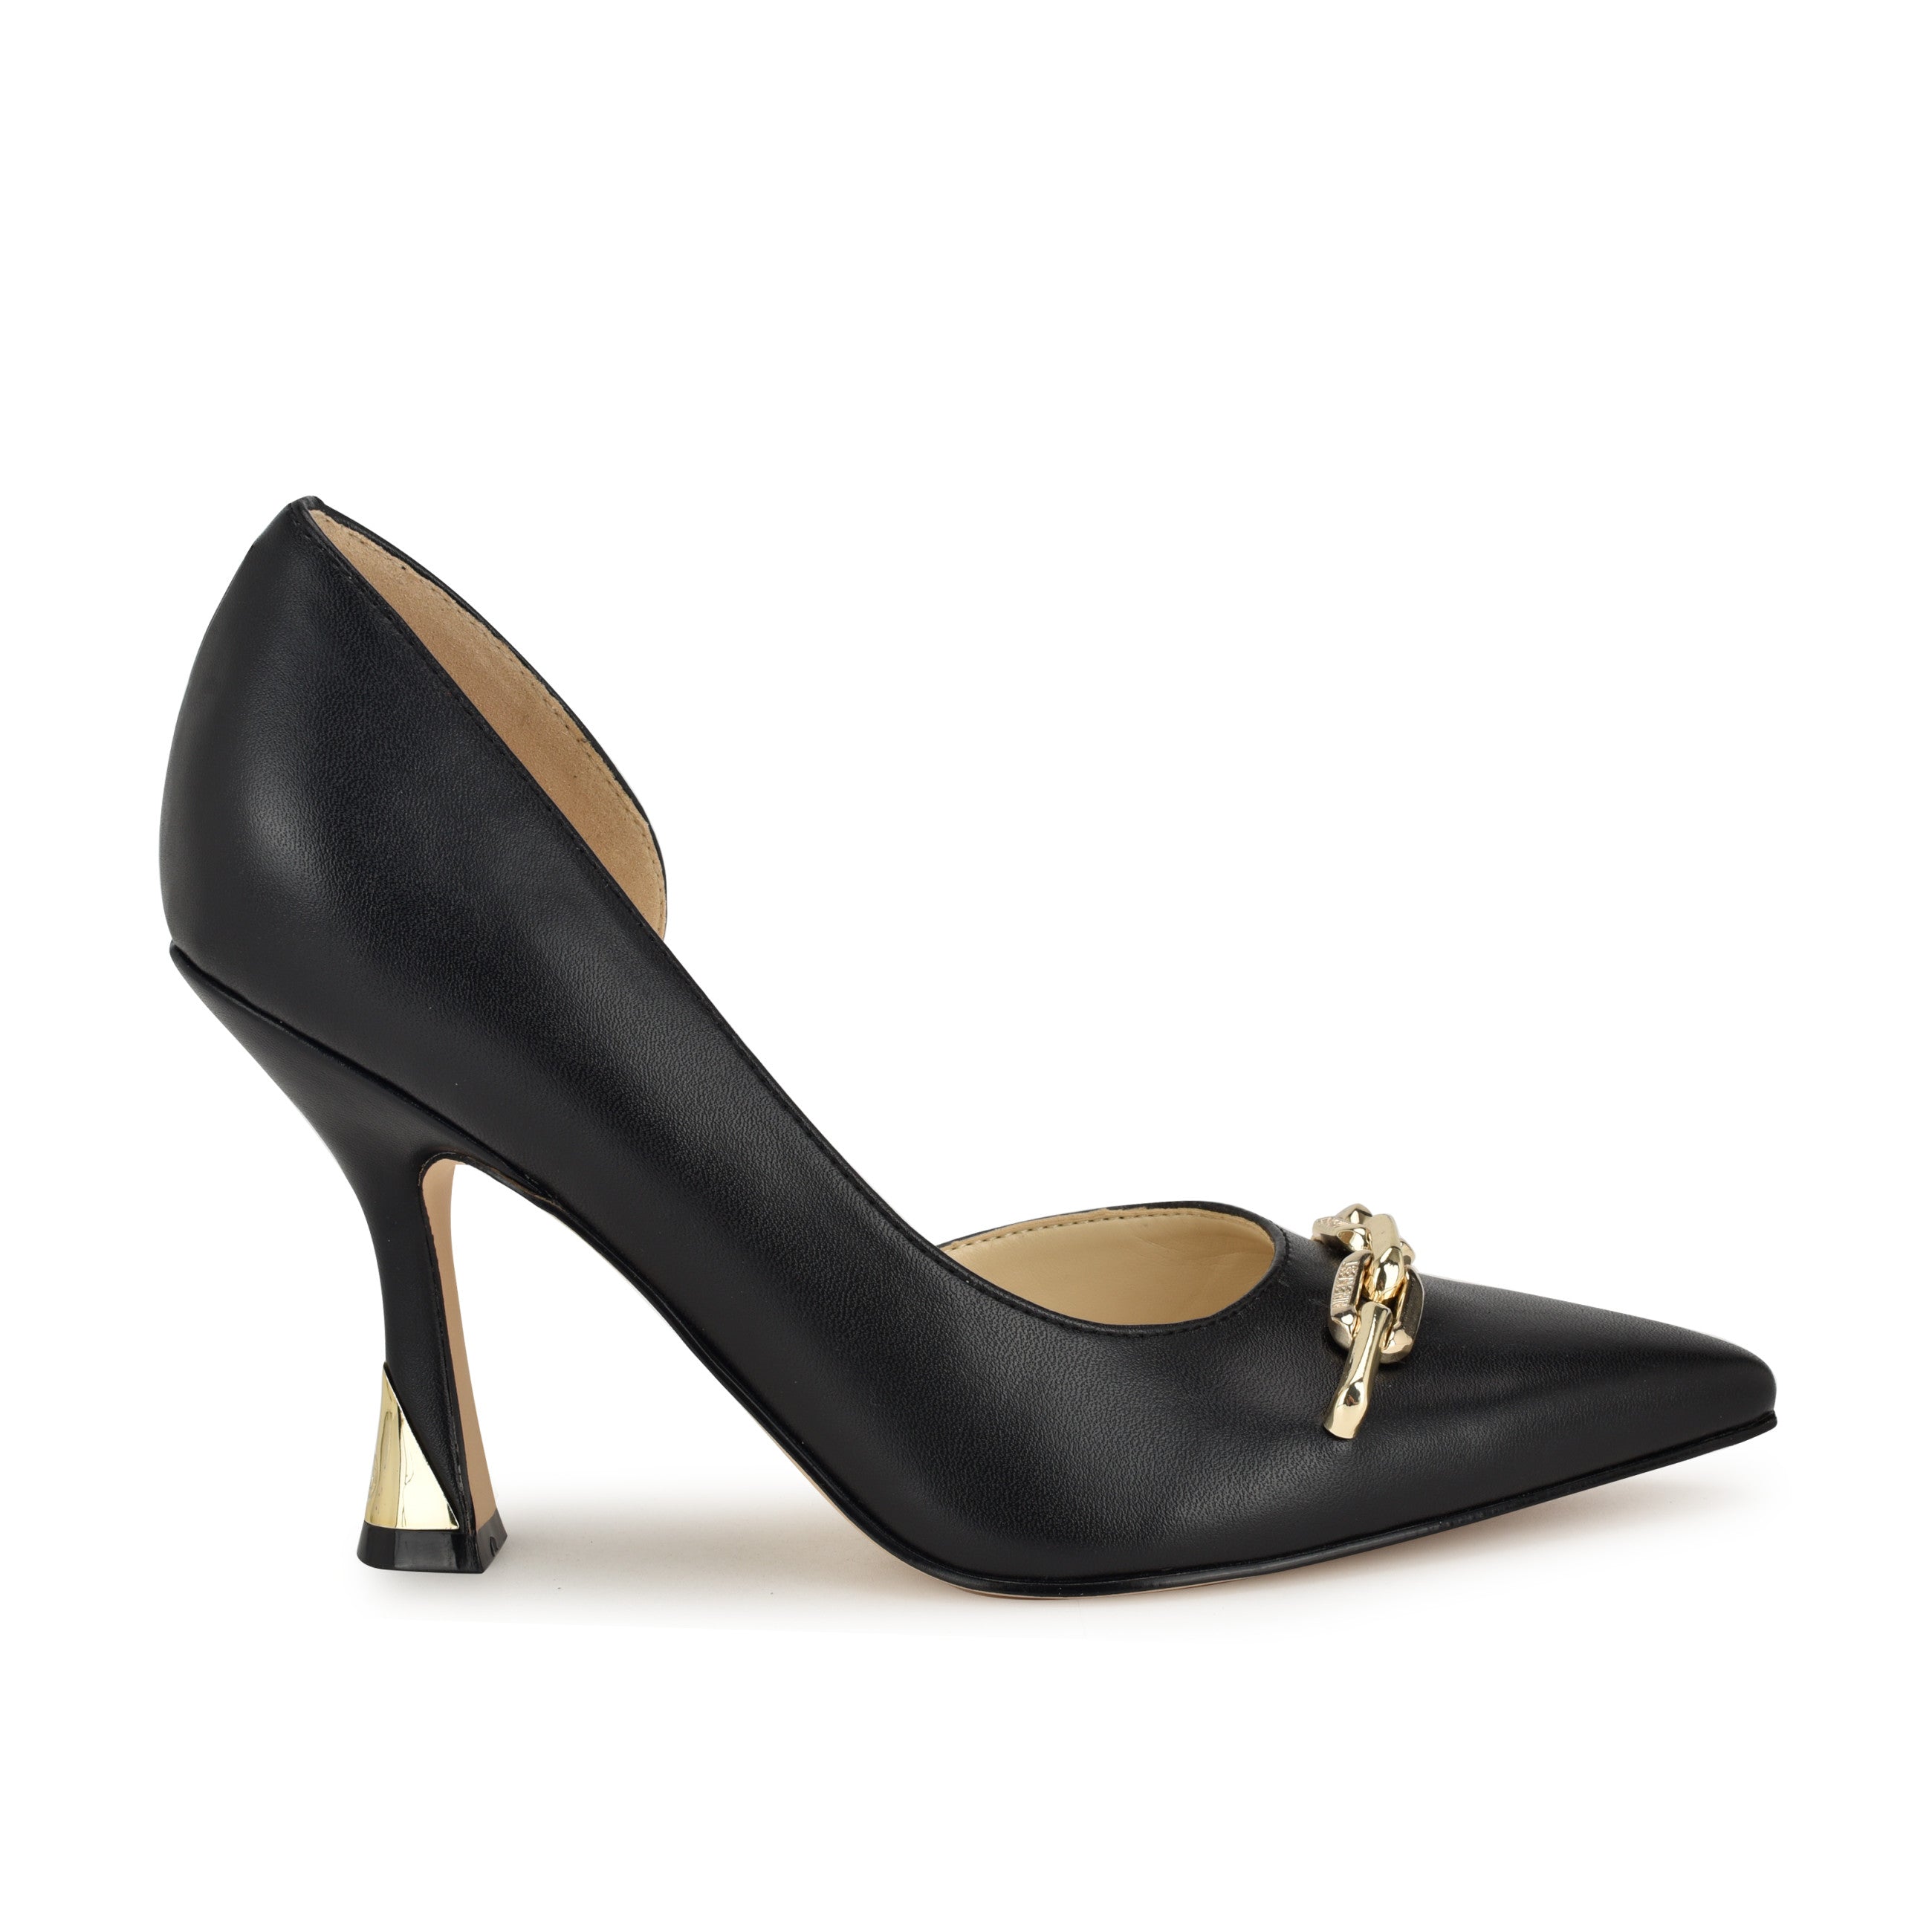 Vampe d'Orsay Chain Pumps